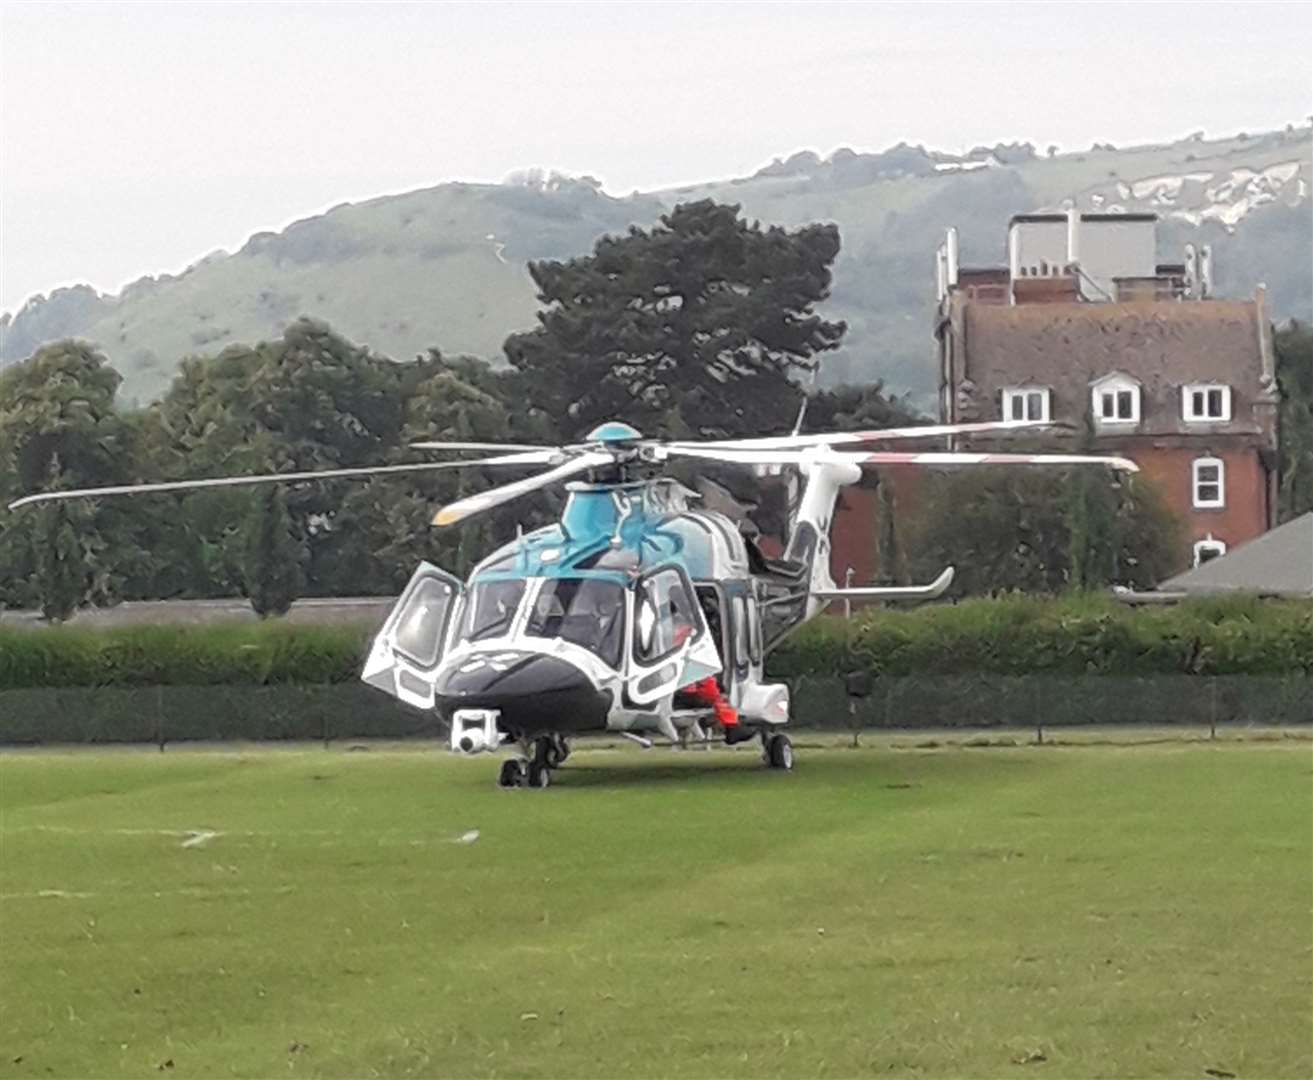 The air ambulance landed in Folkestone's Radnor Park. Picture: Liam Smith